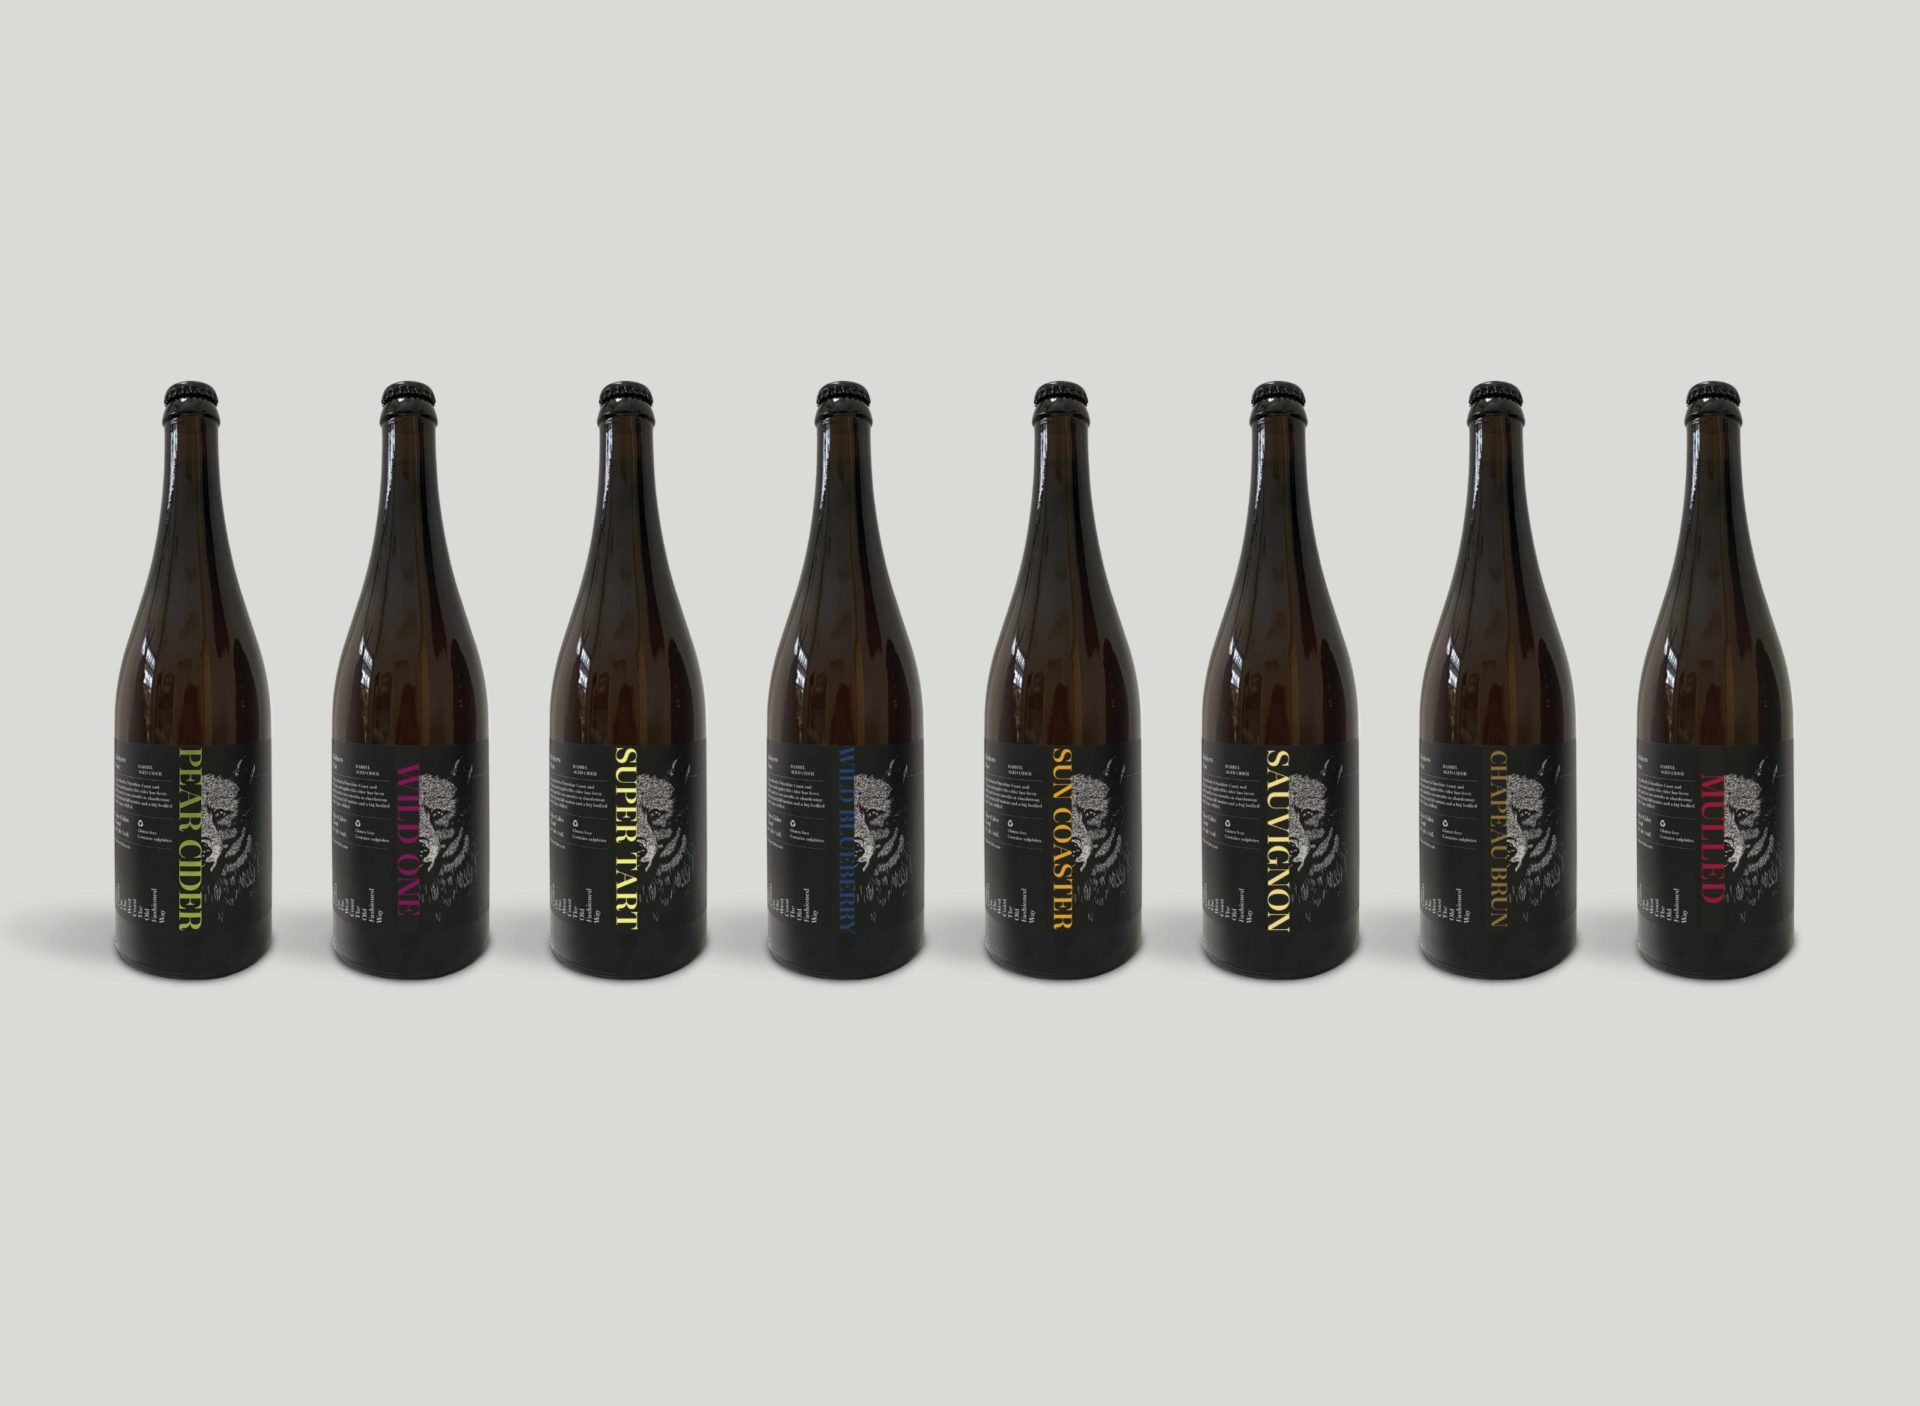 Brickers Cider Product Lineup with Custom Packaging for Bottle Labels